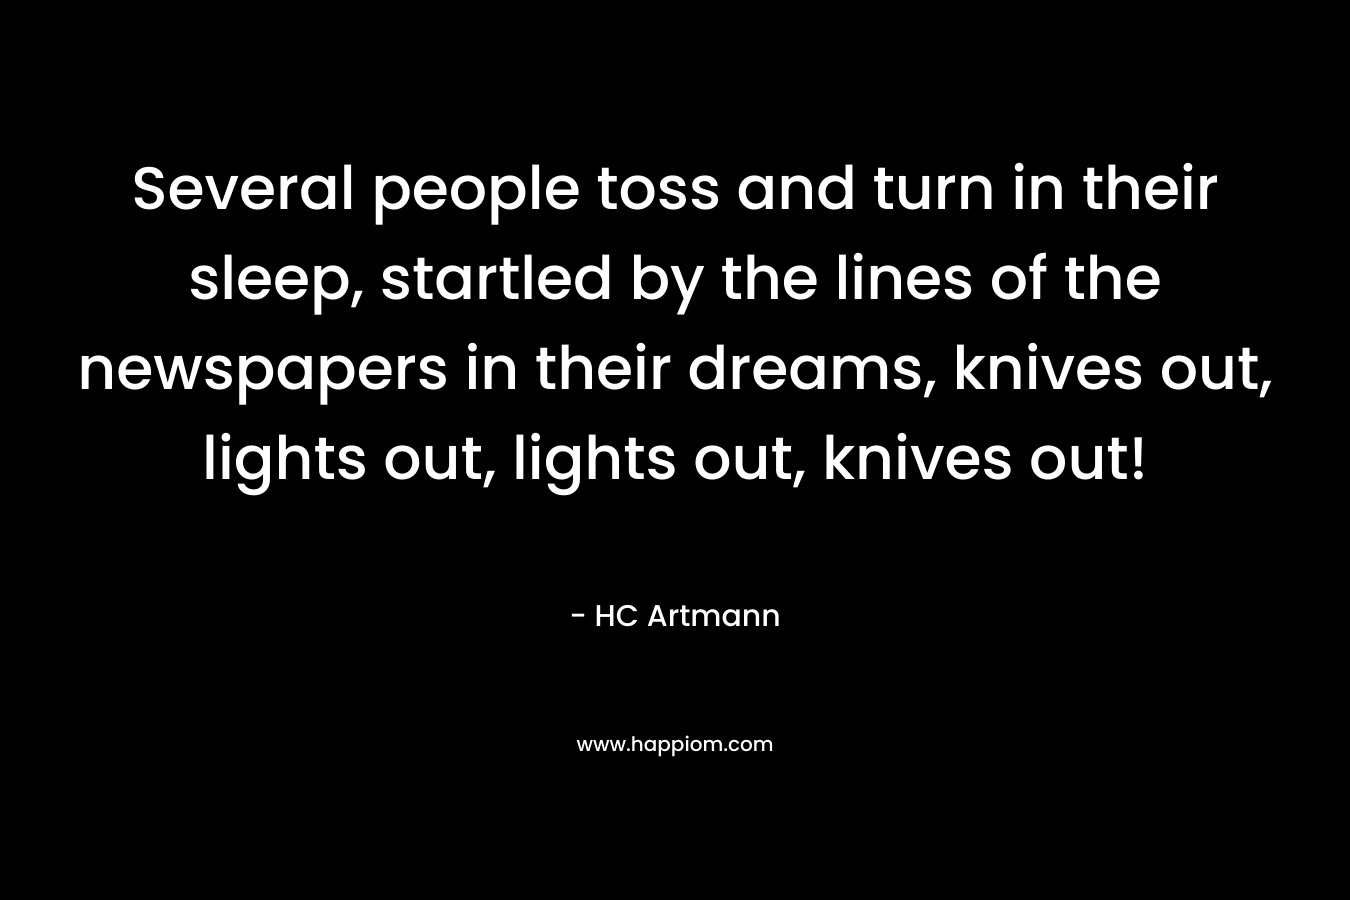 Several people toss and turn in their sleep, startled by the lines of the newspapers in their dreams, knives out, lights out, lights out, knives out! – HC Artmann